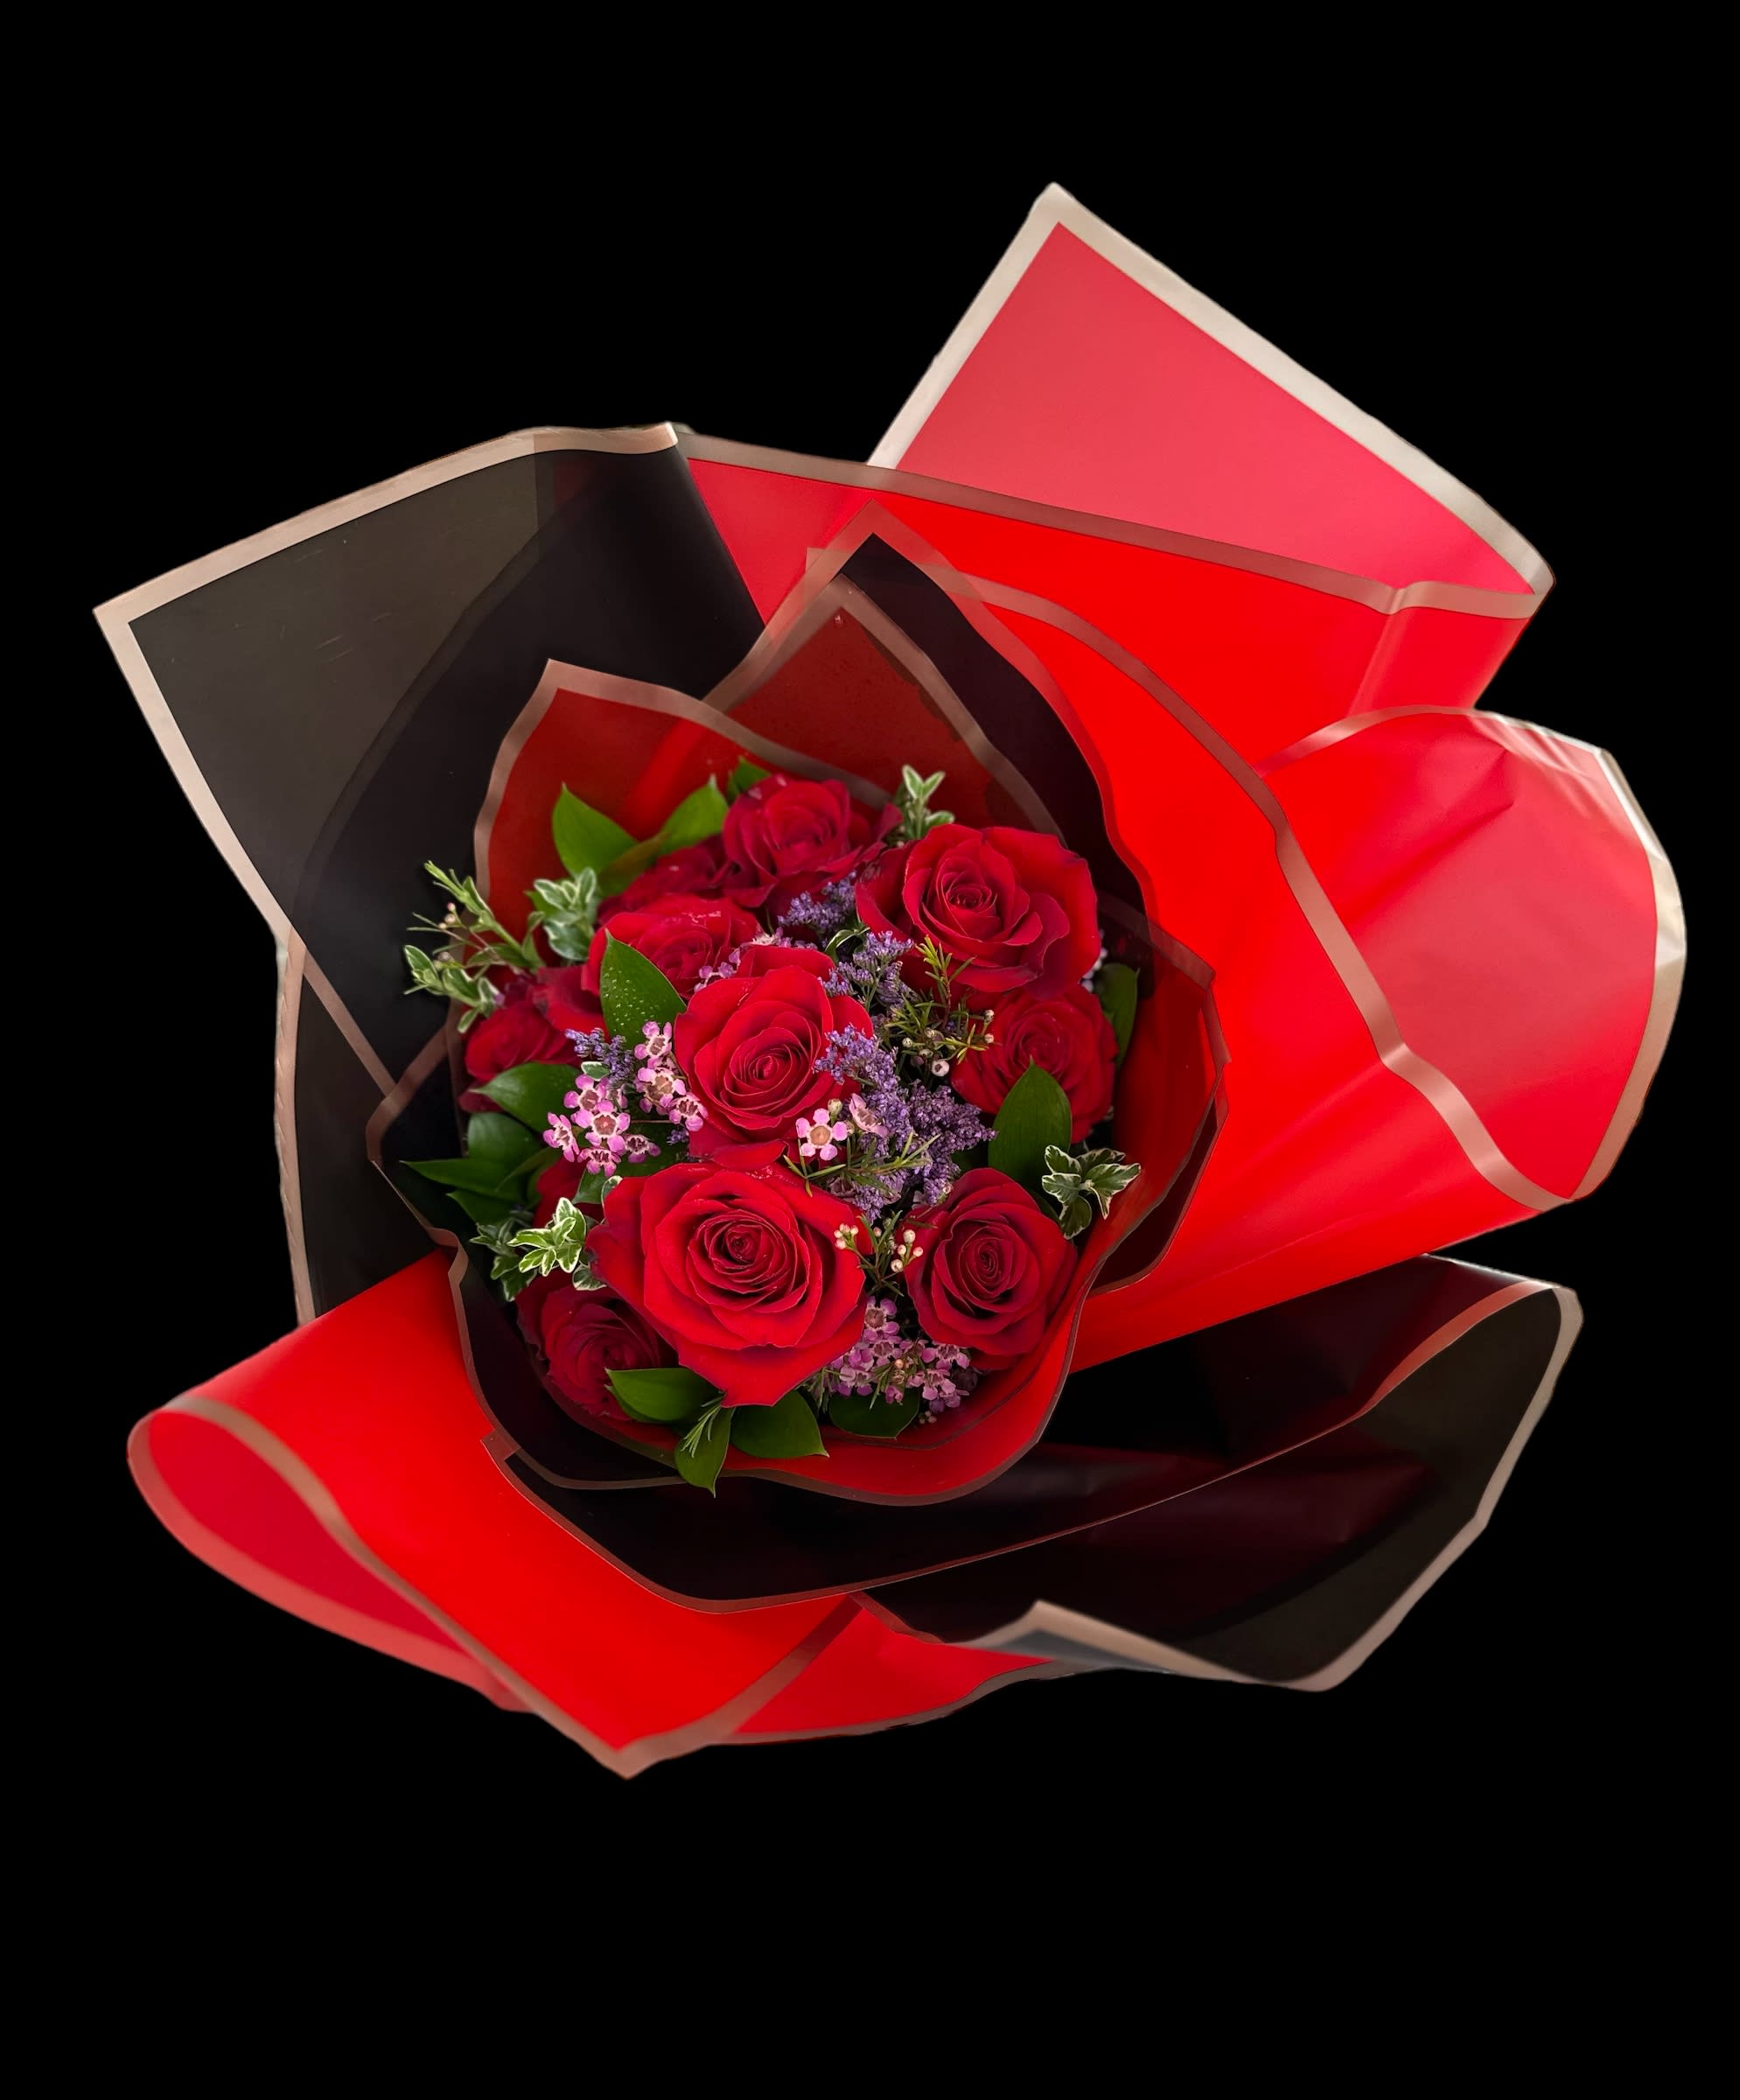 Chaney´s Red Romance 1001 - Romance is in the air with this stunning classic dozen of long stemmed red roses, with mixed greenery enhanced with a touch of hot pink wax flour in lavender Limonium. This is a wrapped bouquet.